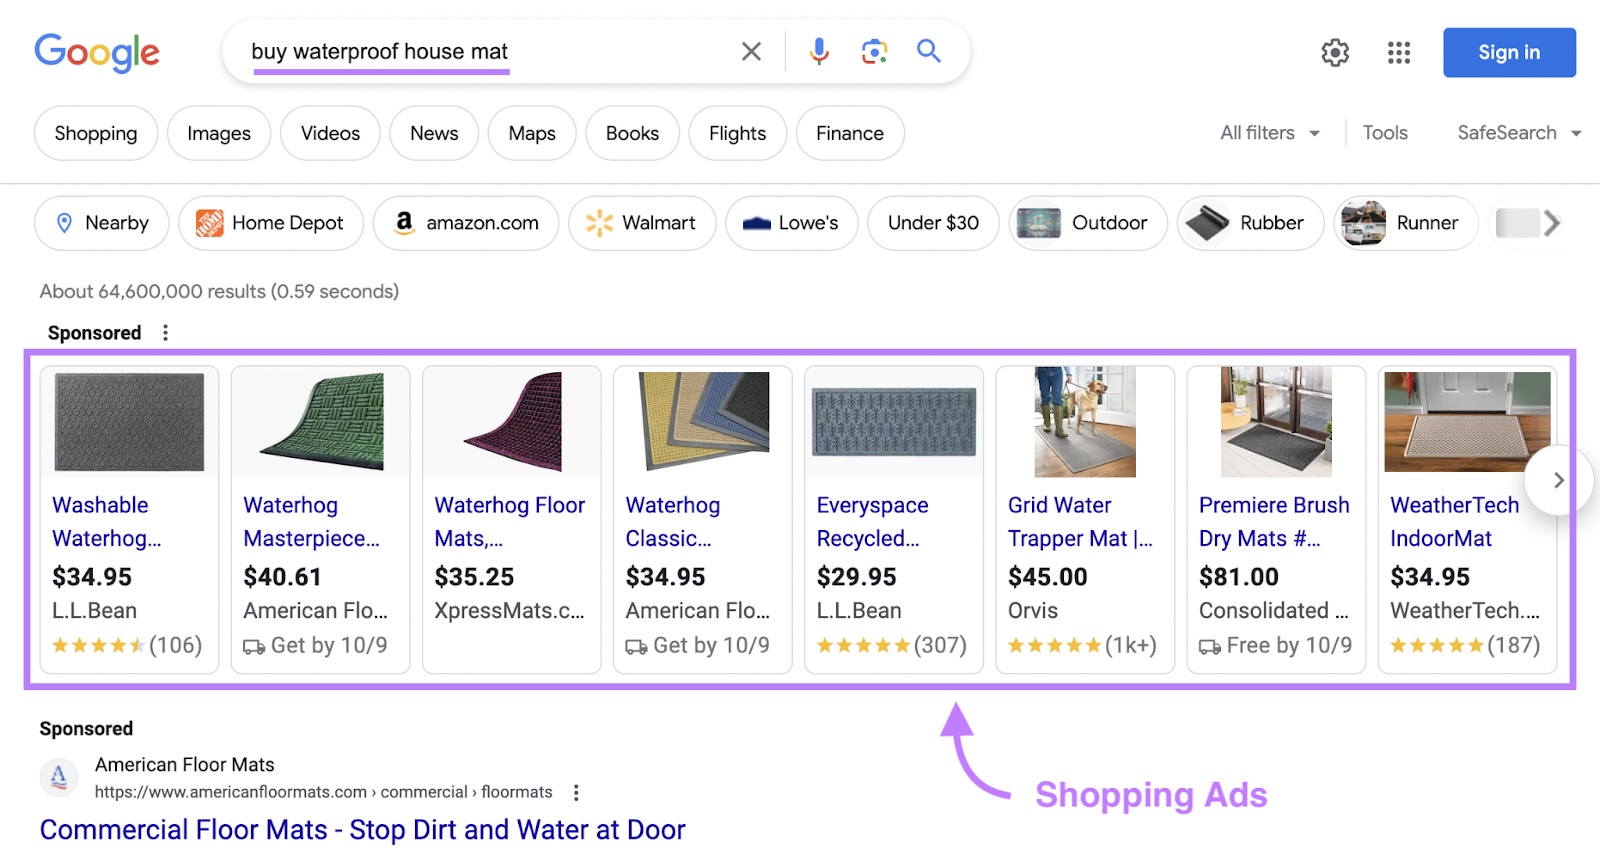 Google shopping ads appearing for “buy waterproof house mat" query